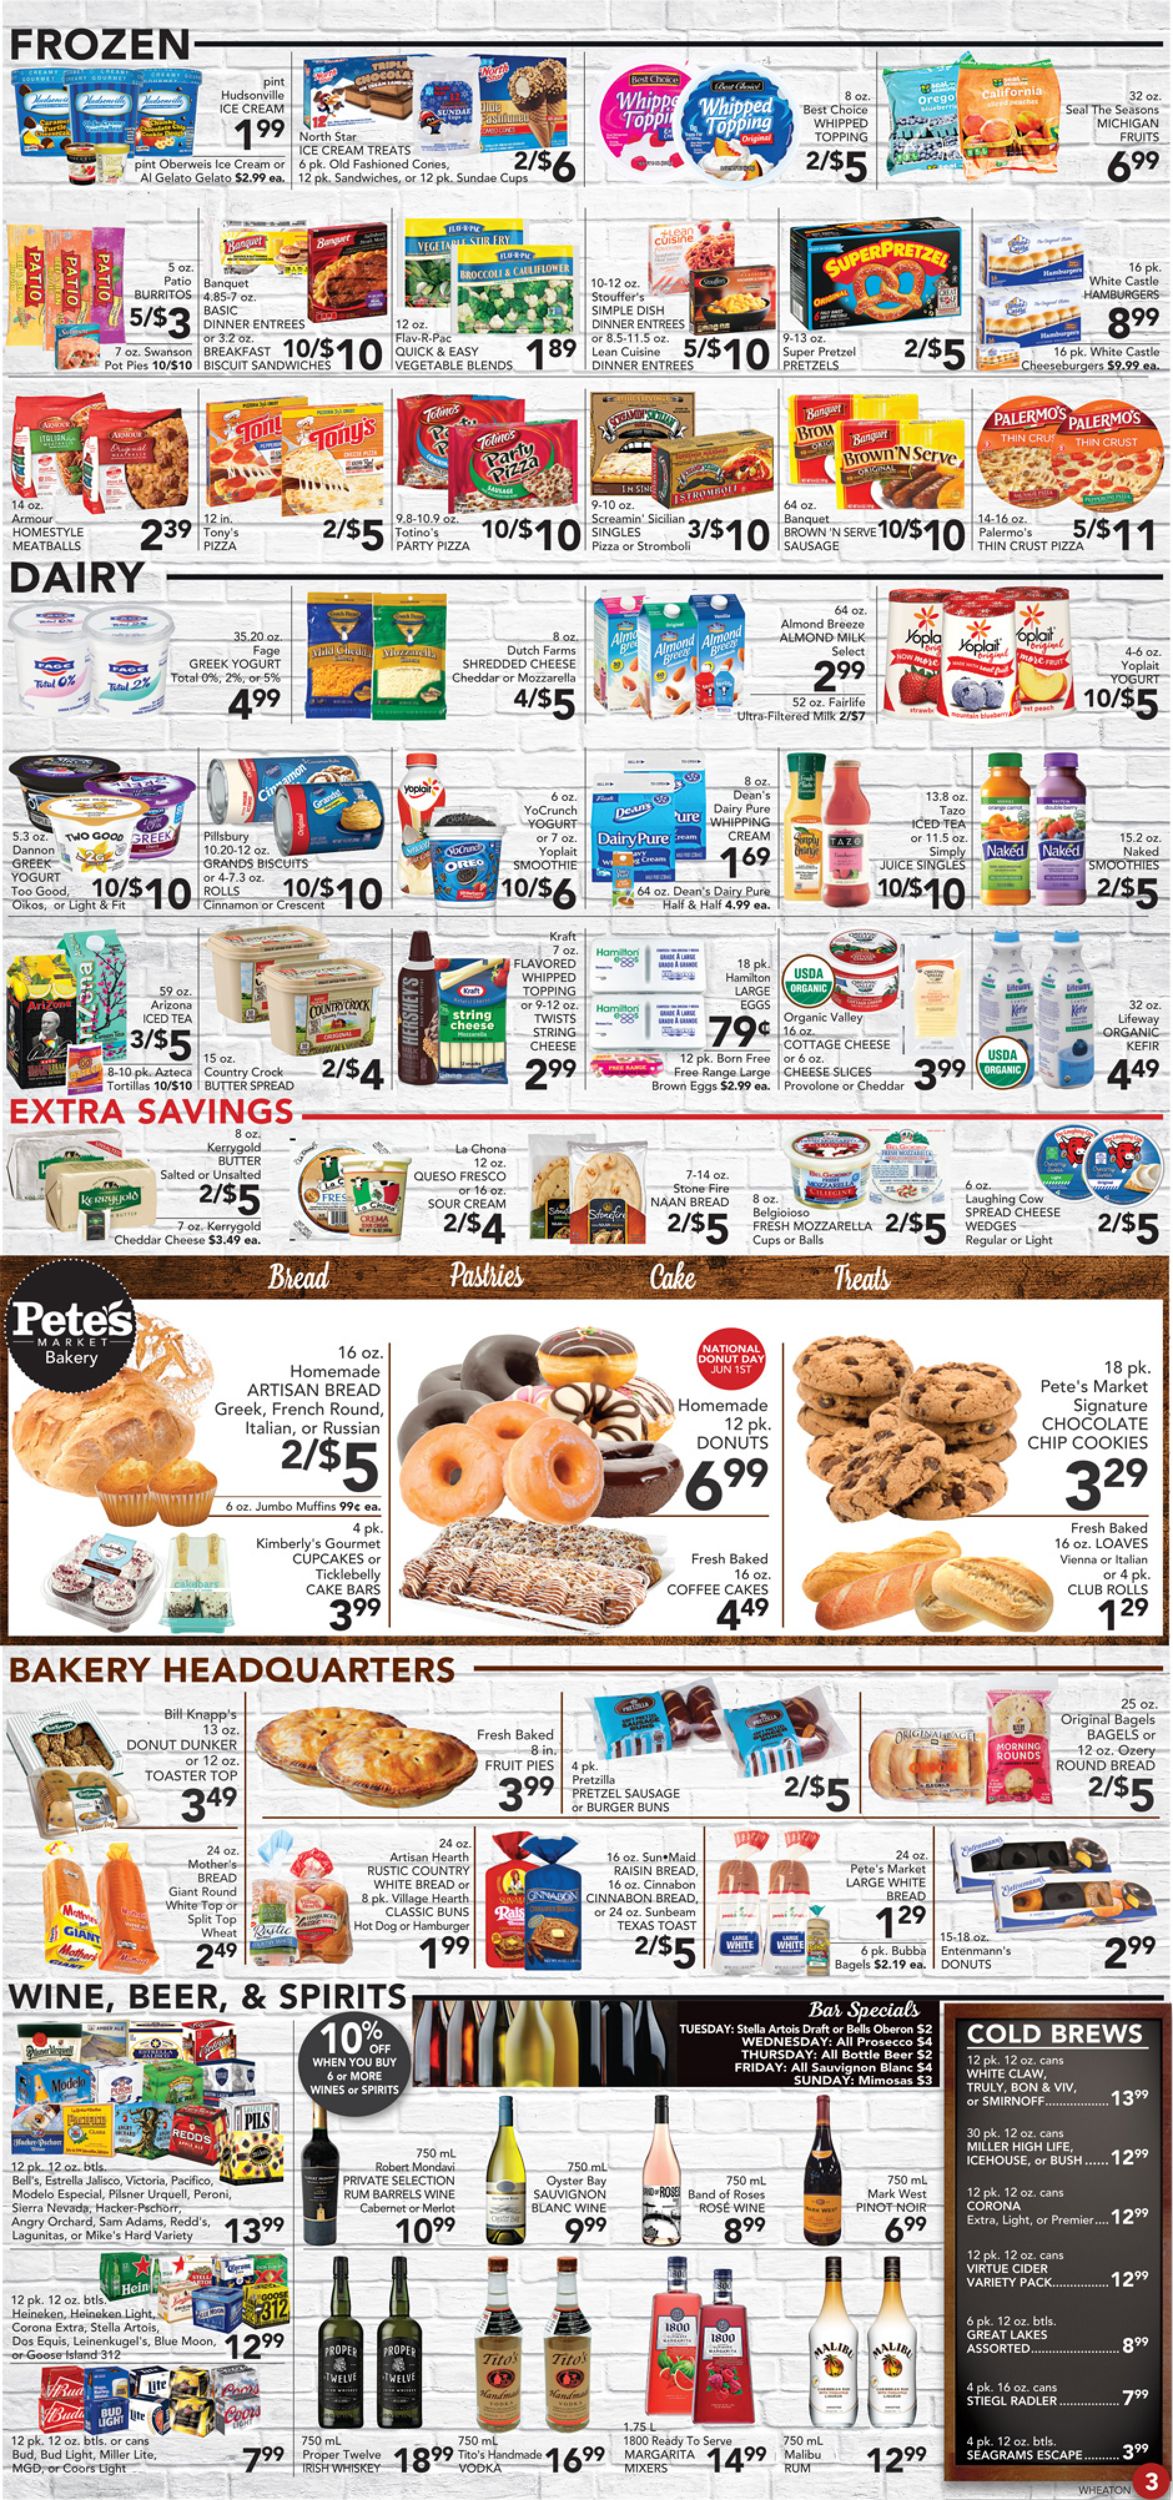 Catalogue Pete's Fresh Market from 05/29/2019